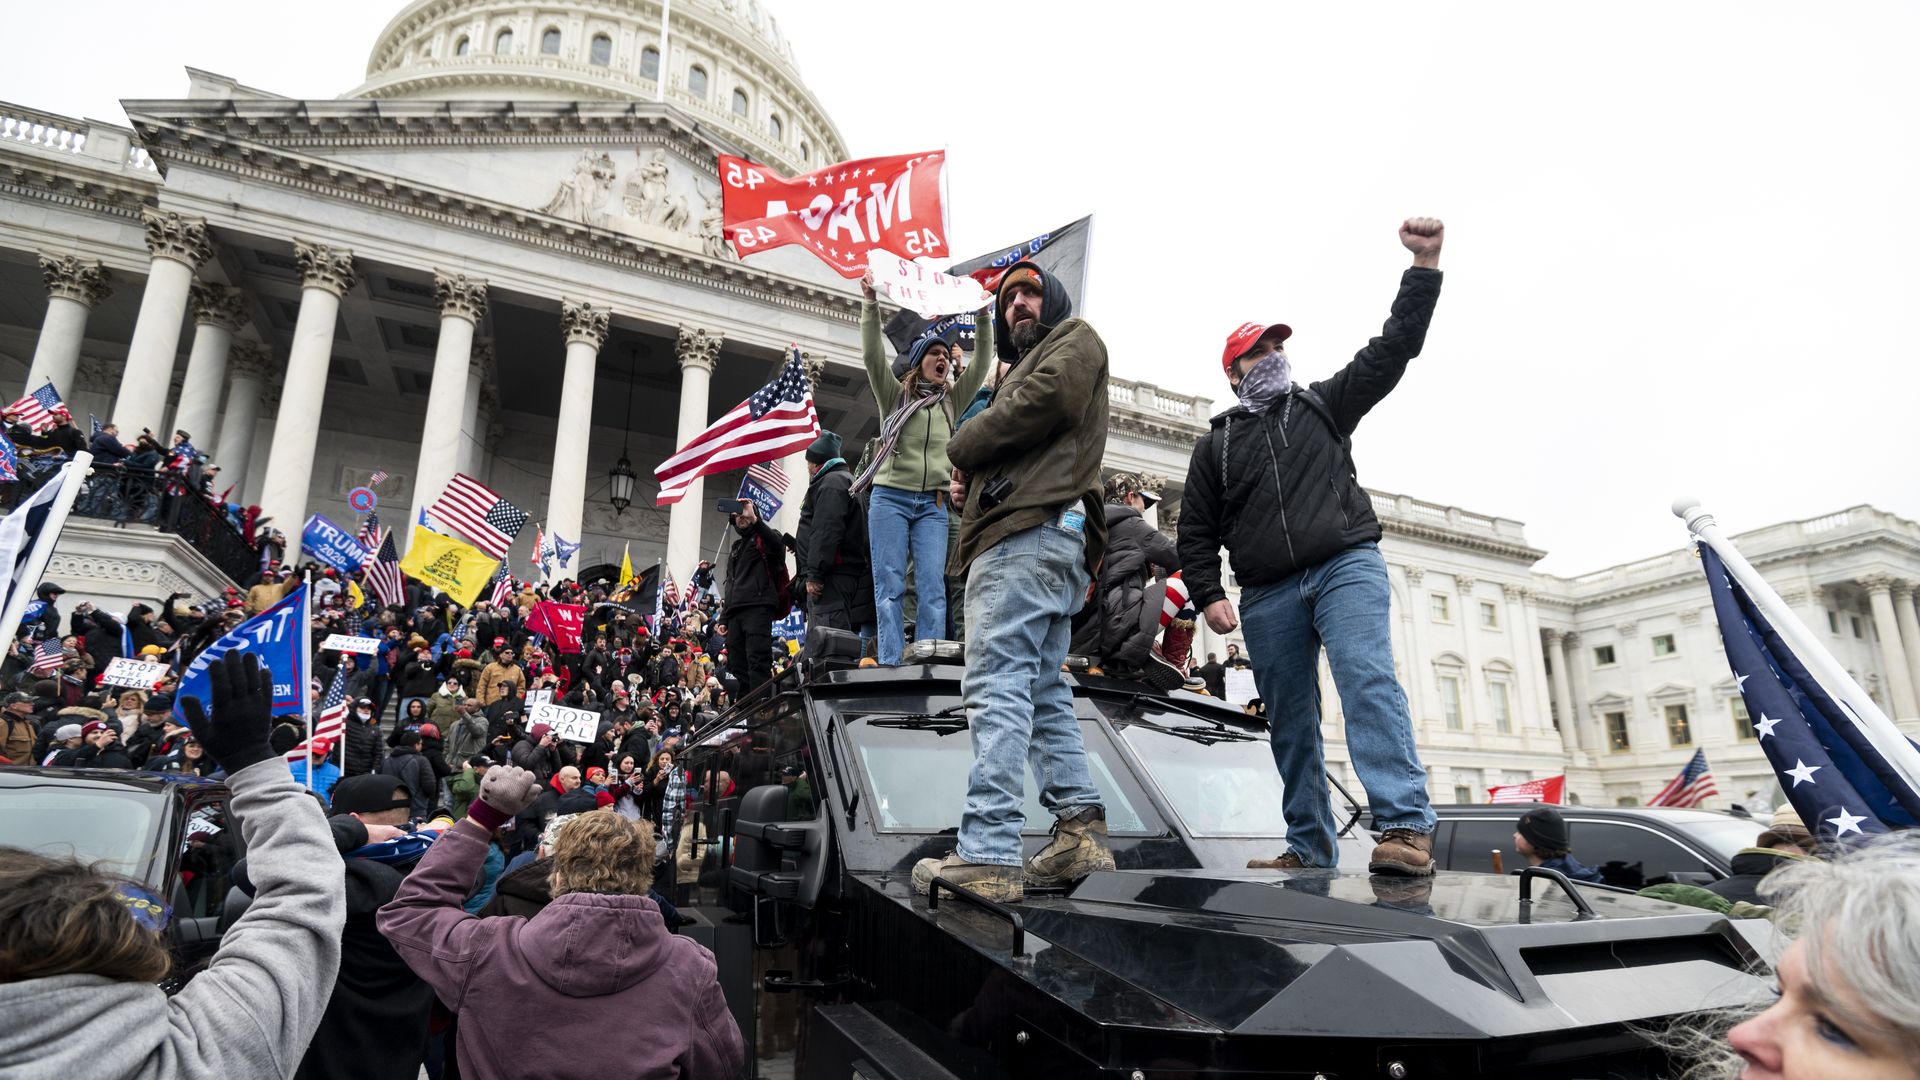 Trump supporters stand on the U.S. Capitol Police armored vehicle 